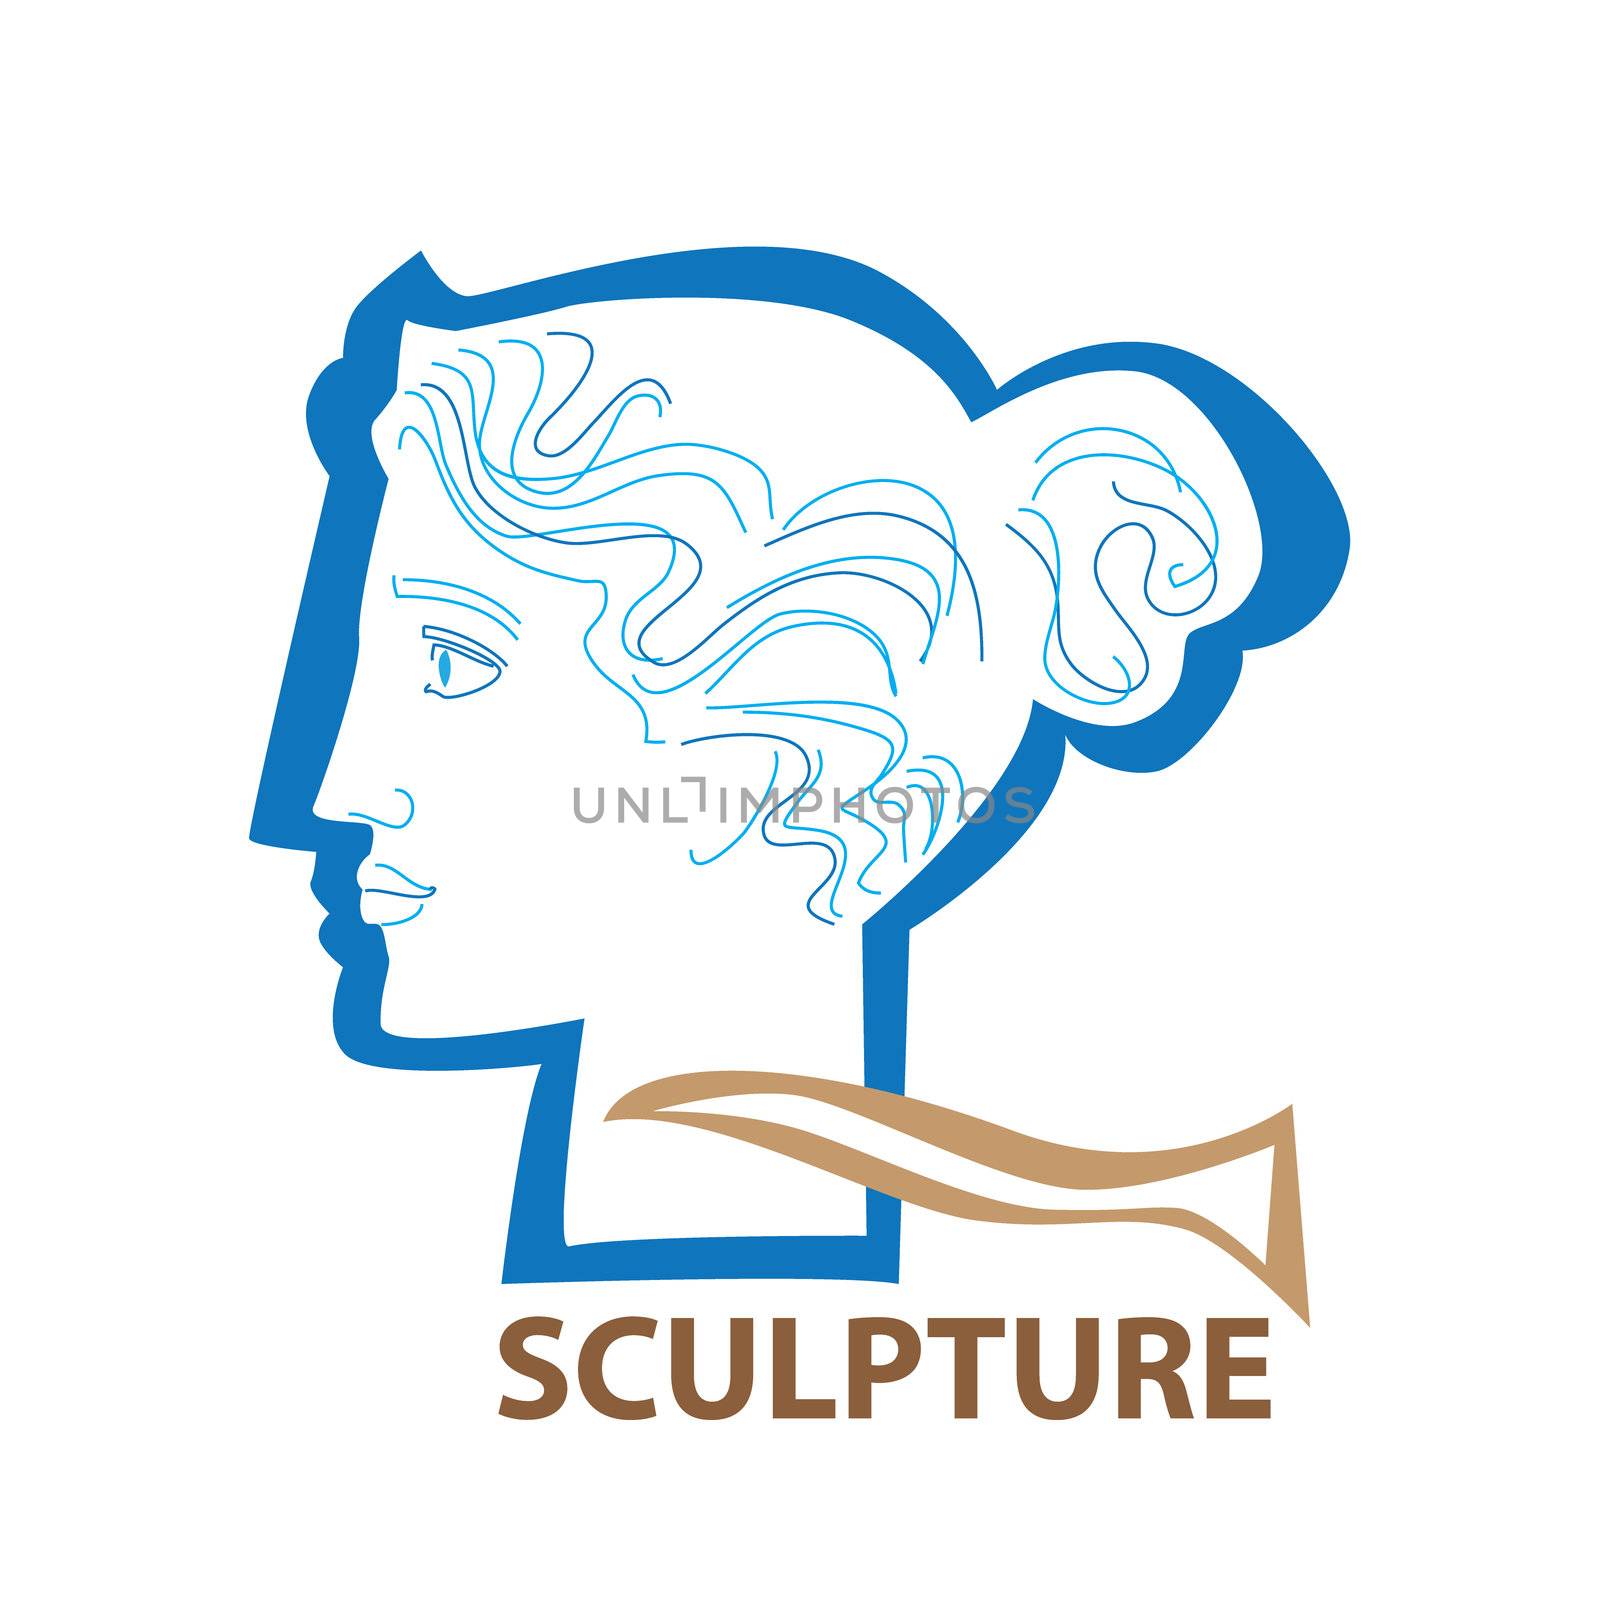 Template icon Art - a symbol of sculpture. Vector sign.